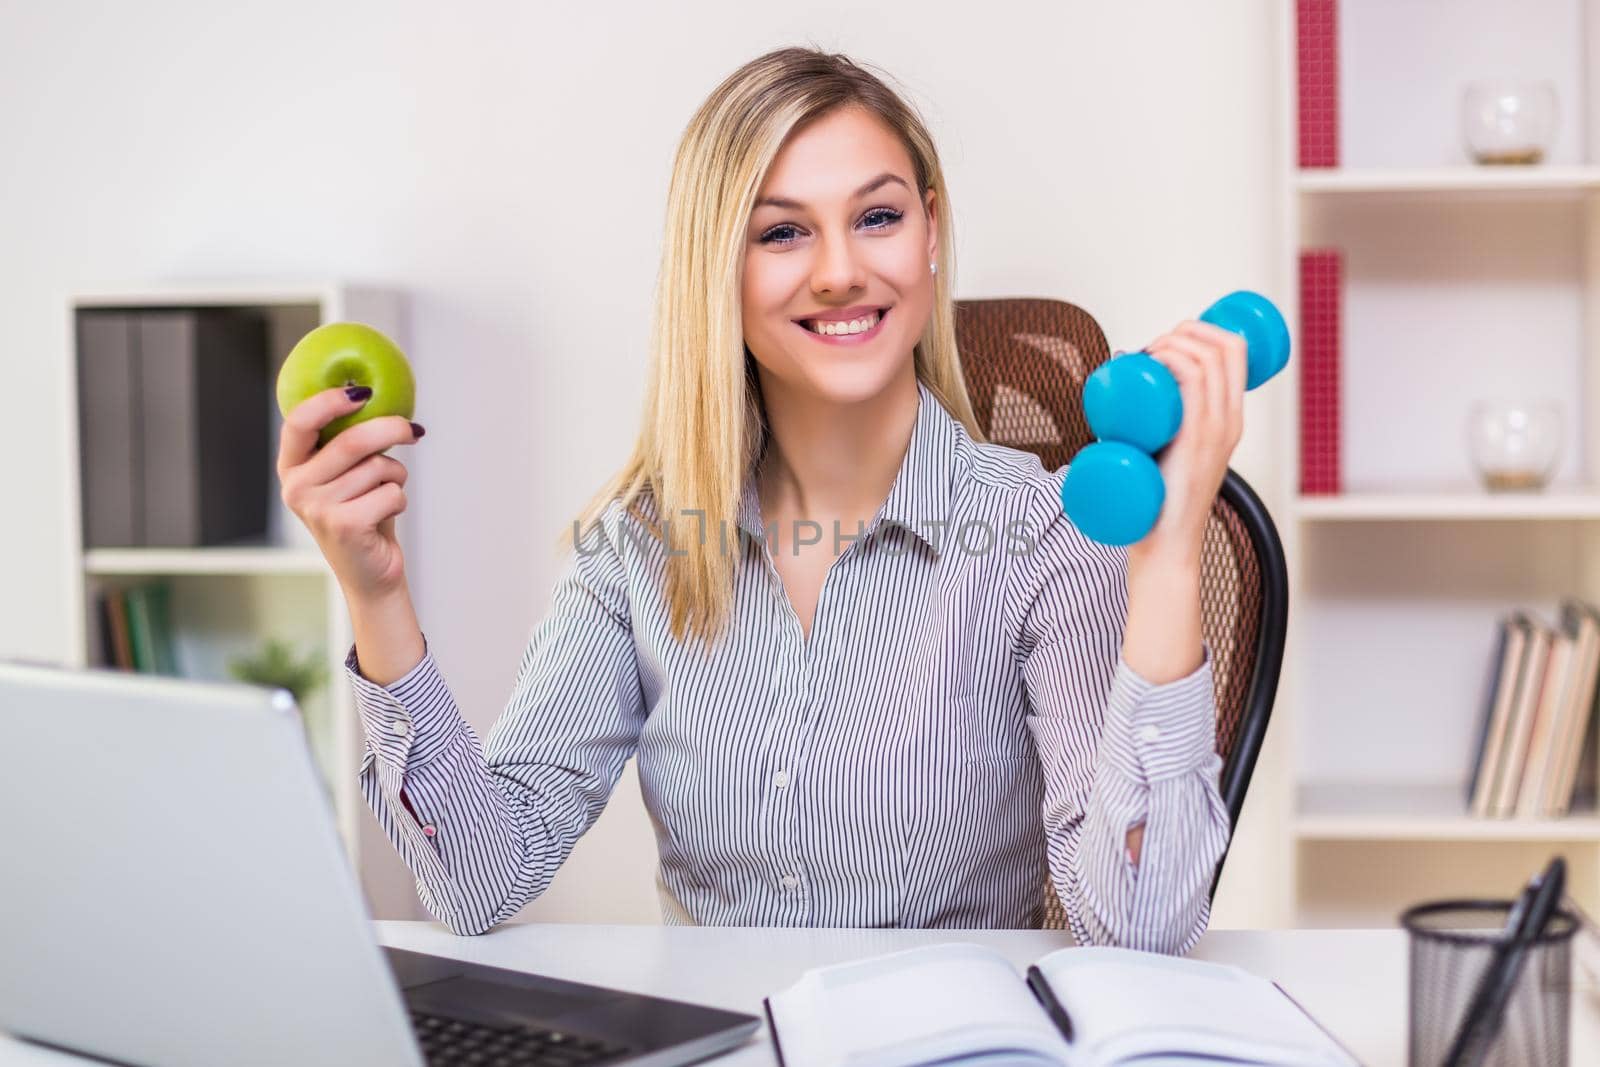 Beautiful businesswoman holding apple and weights while working in her office.